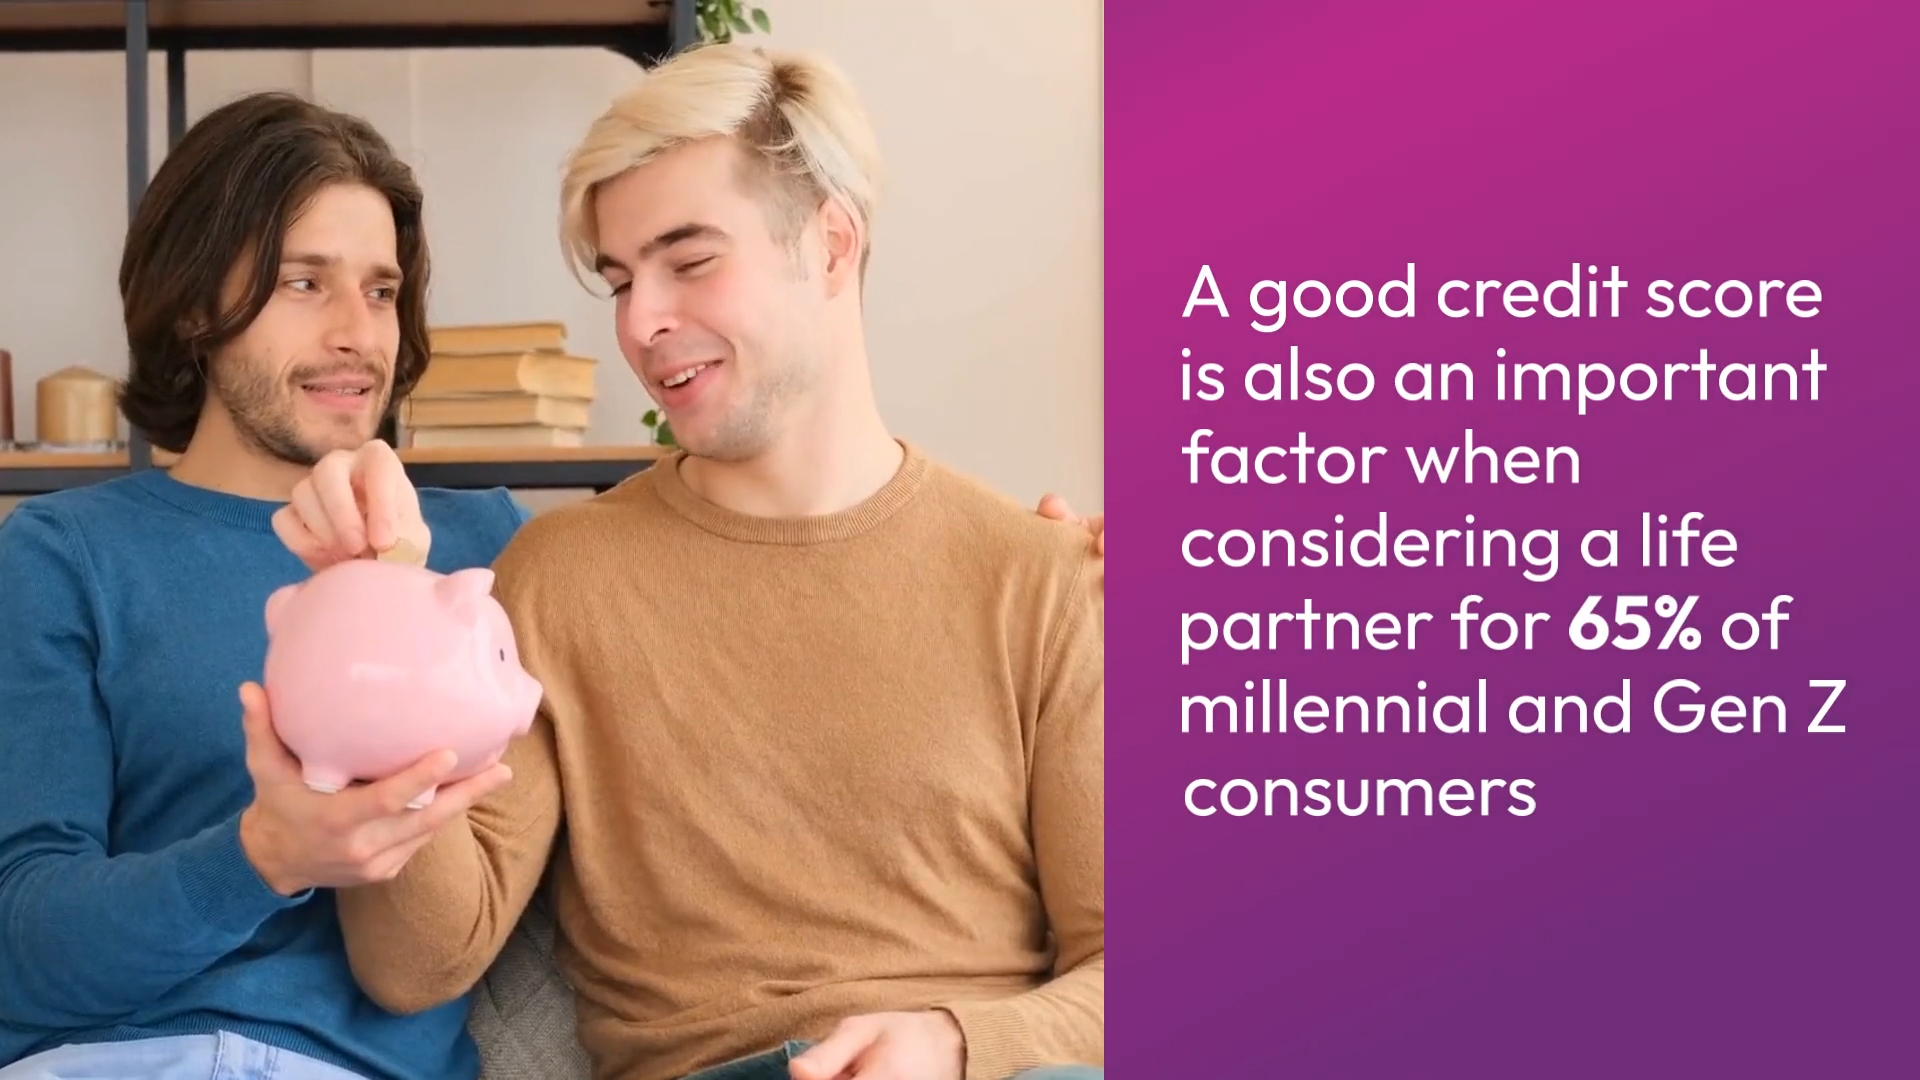 Survey says: many millennials and Gen Z consumers are actively trying to improve their credit scores. Watch this short video to learn more.